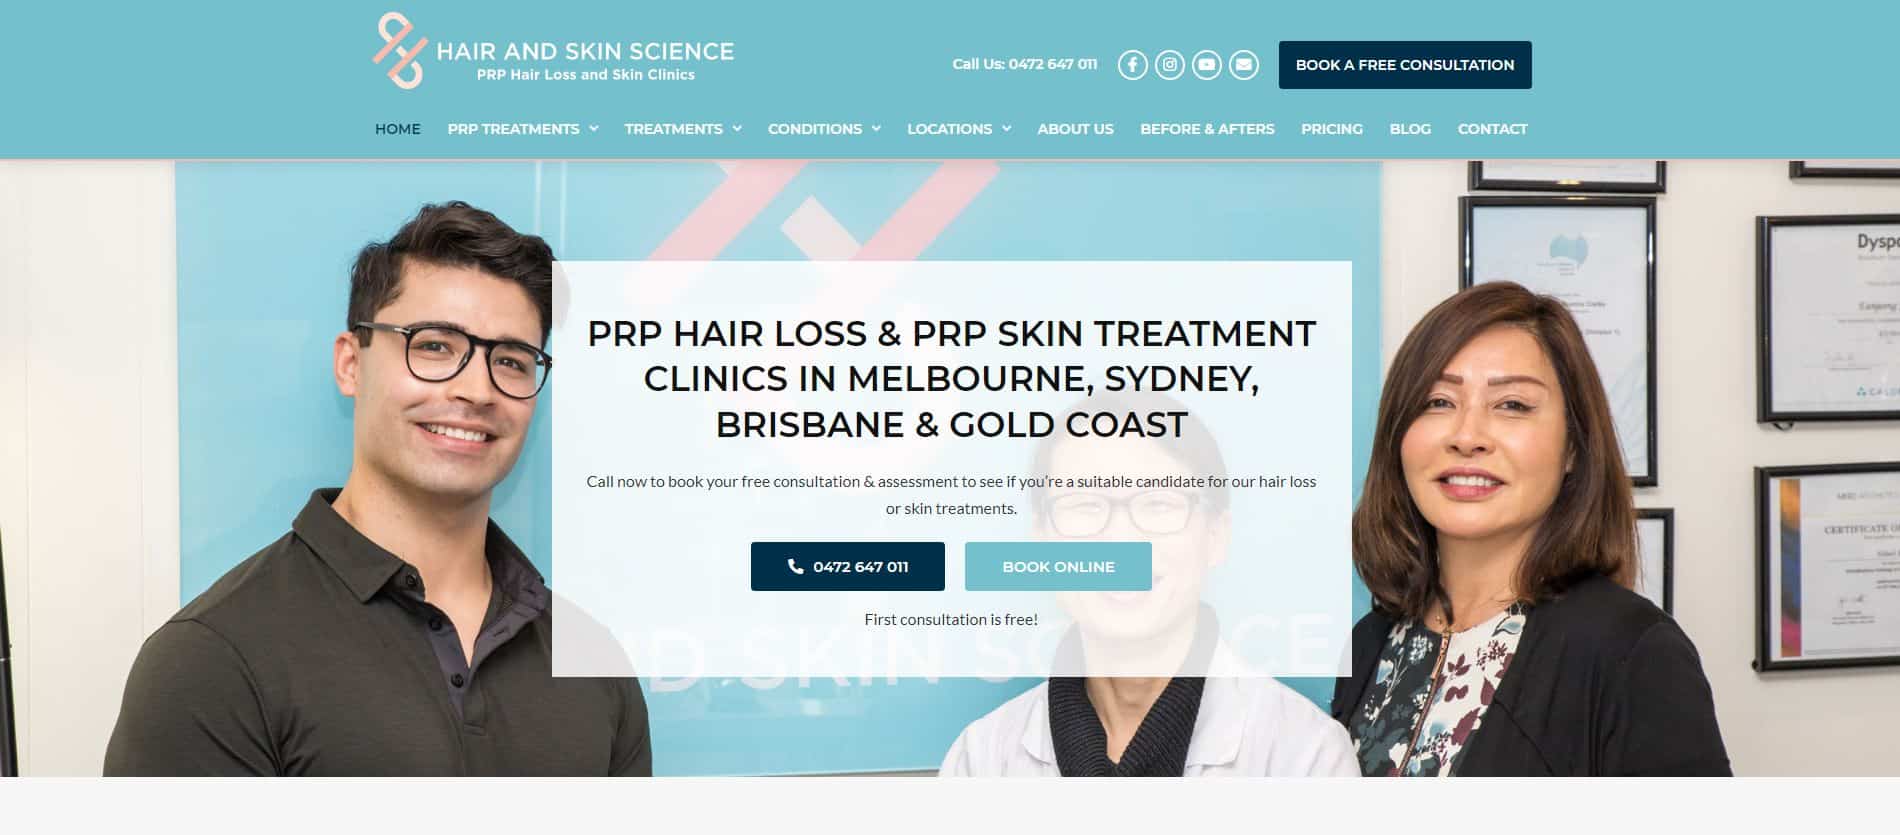 hair and skin science melbourne